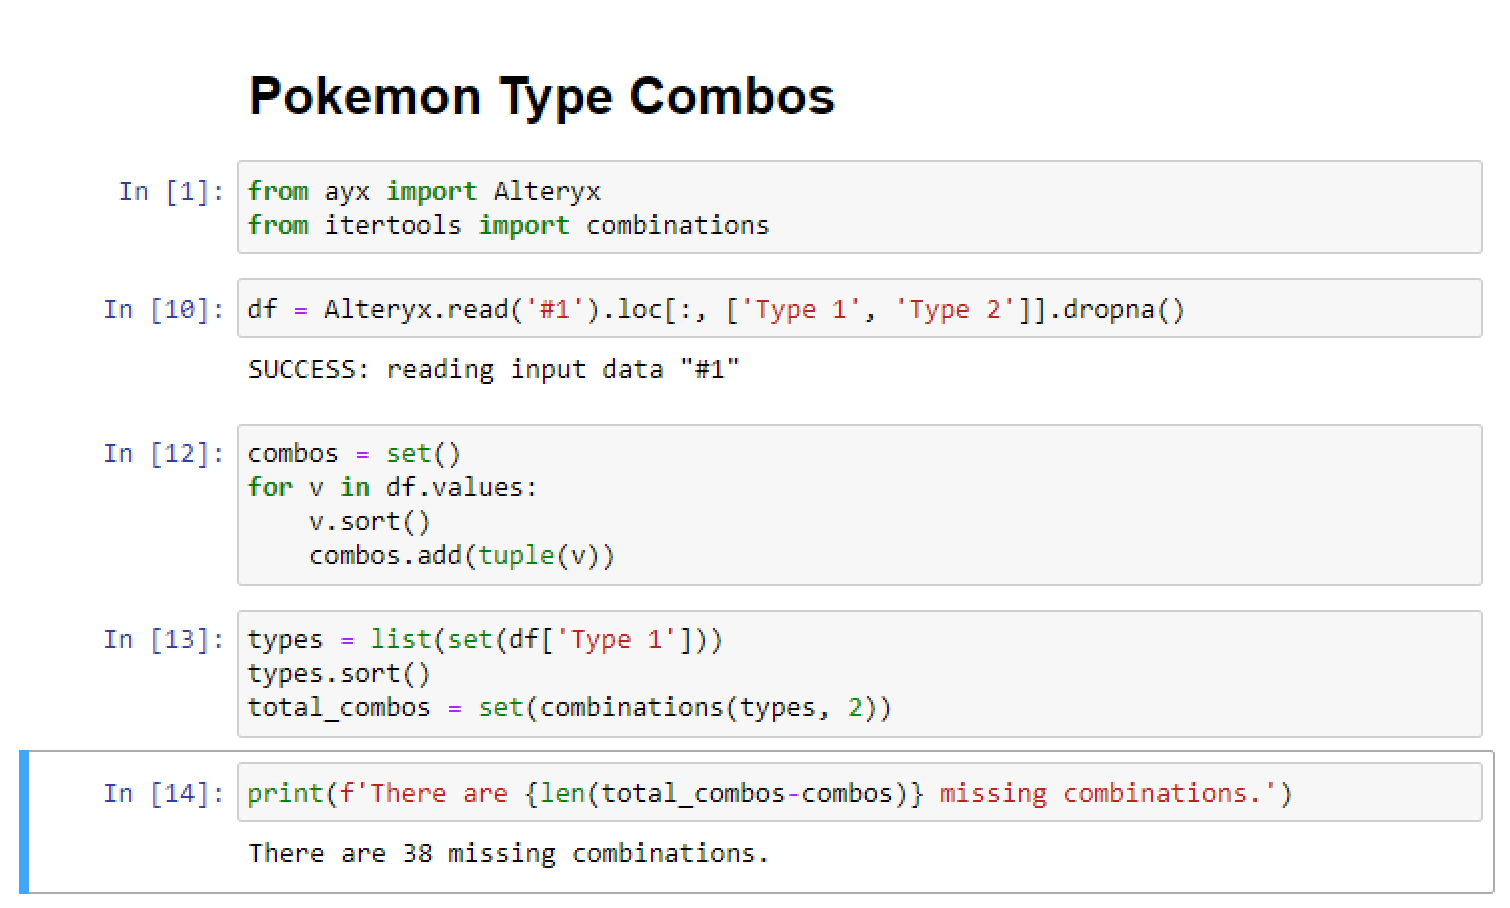 Challenge #391: Which Combinations of Pokémon Type - Page 2 - Alteryx  Community